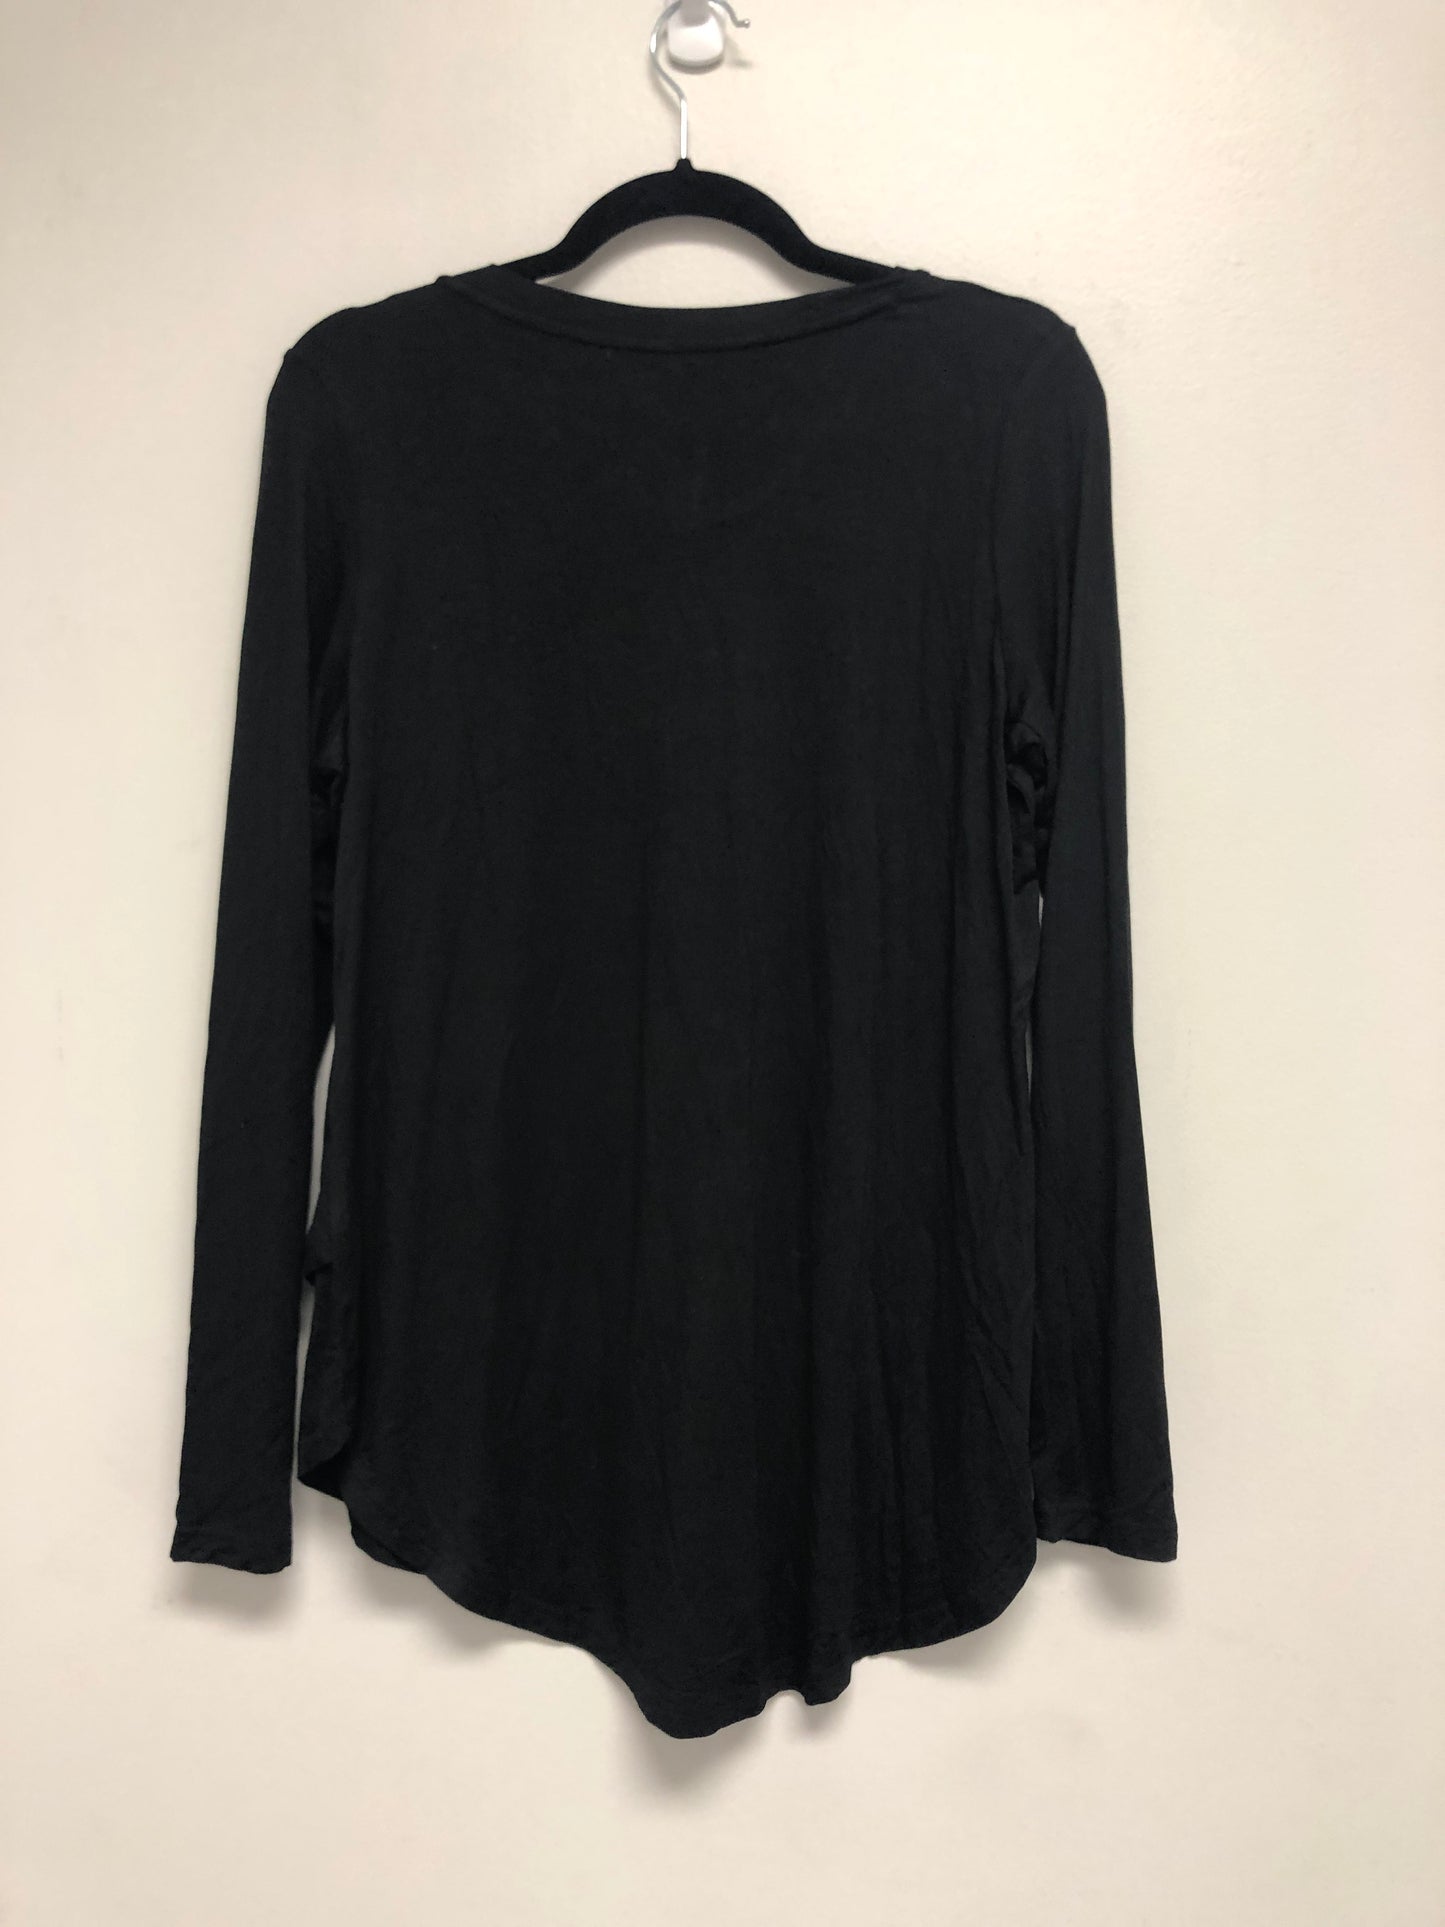 Outlet 6418 - Latched Mama Long Sleeve V-Neck Tee - Black - Small